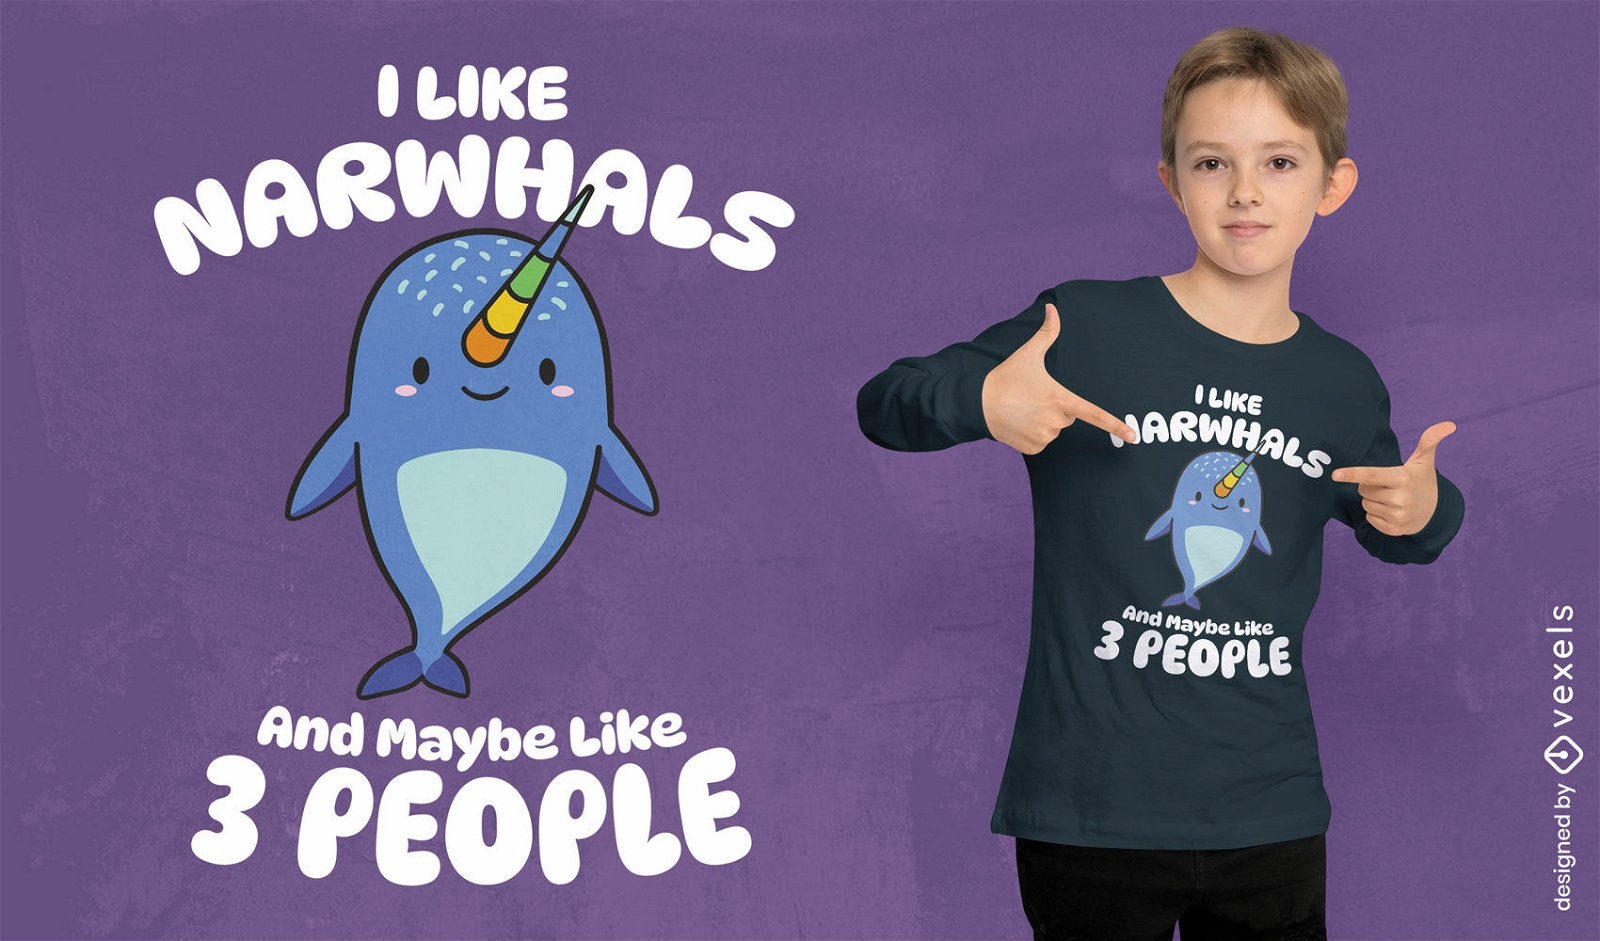 Narwhal introvert quote t-shirt design